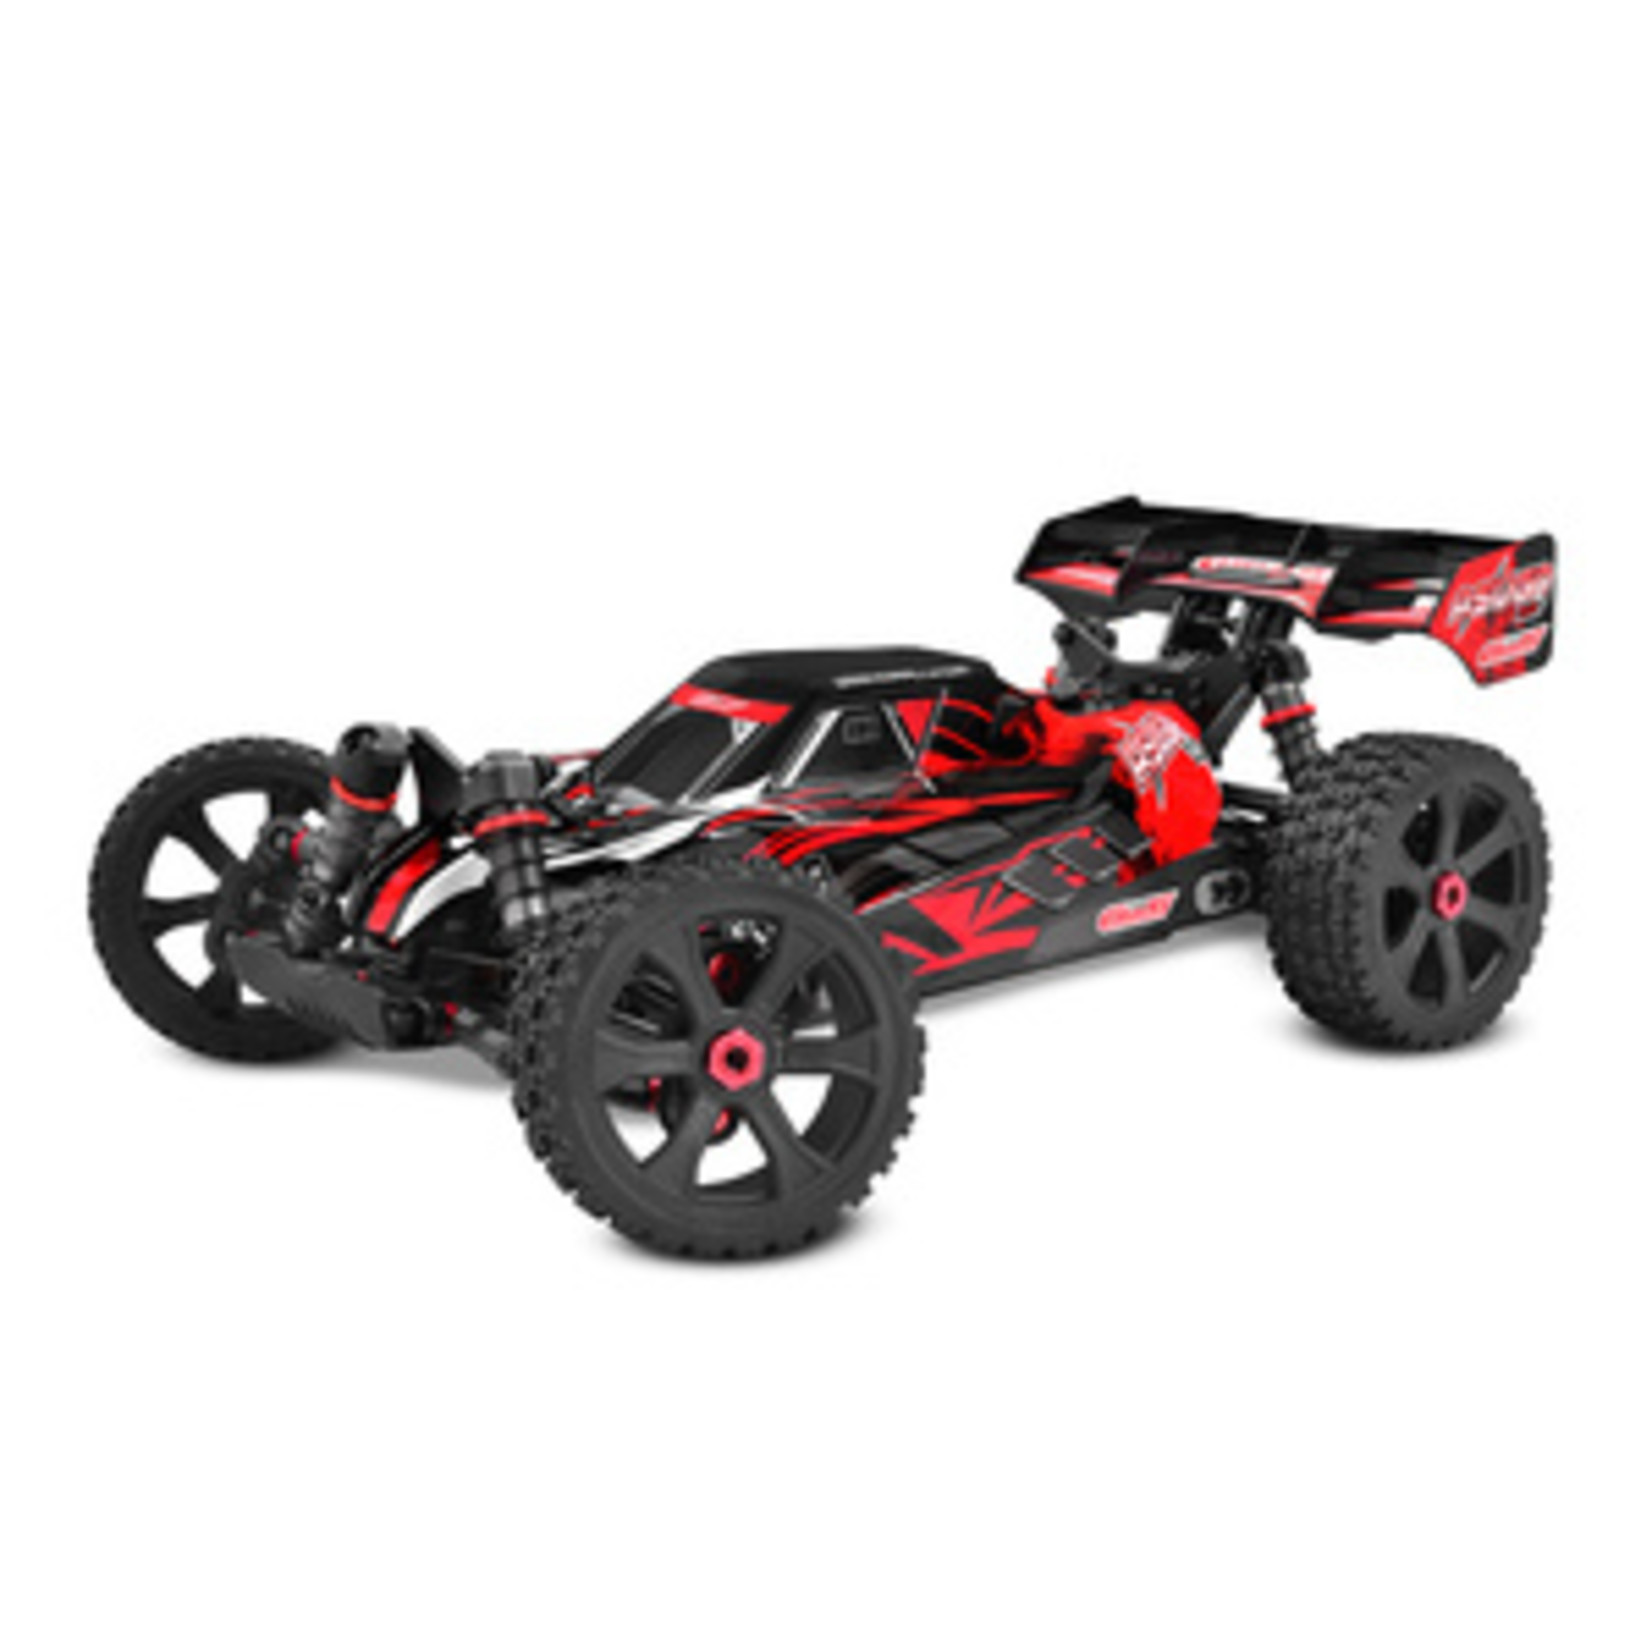 Corally COR00288-R   Asuga XLR 6S RTR Racing Buggy - Red, Large Scale